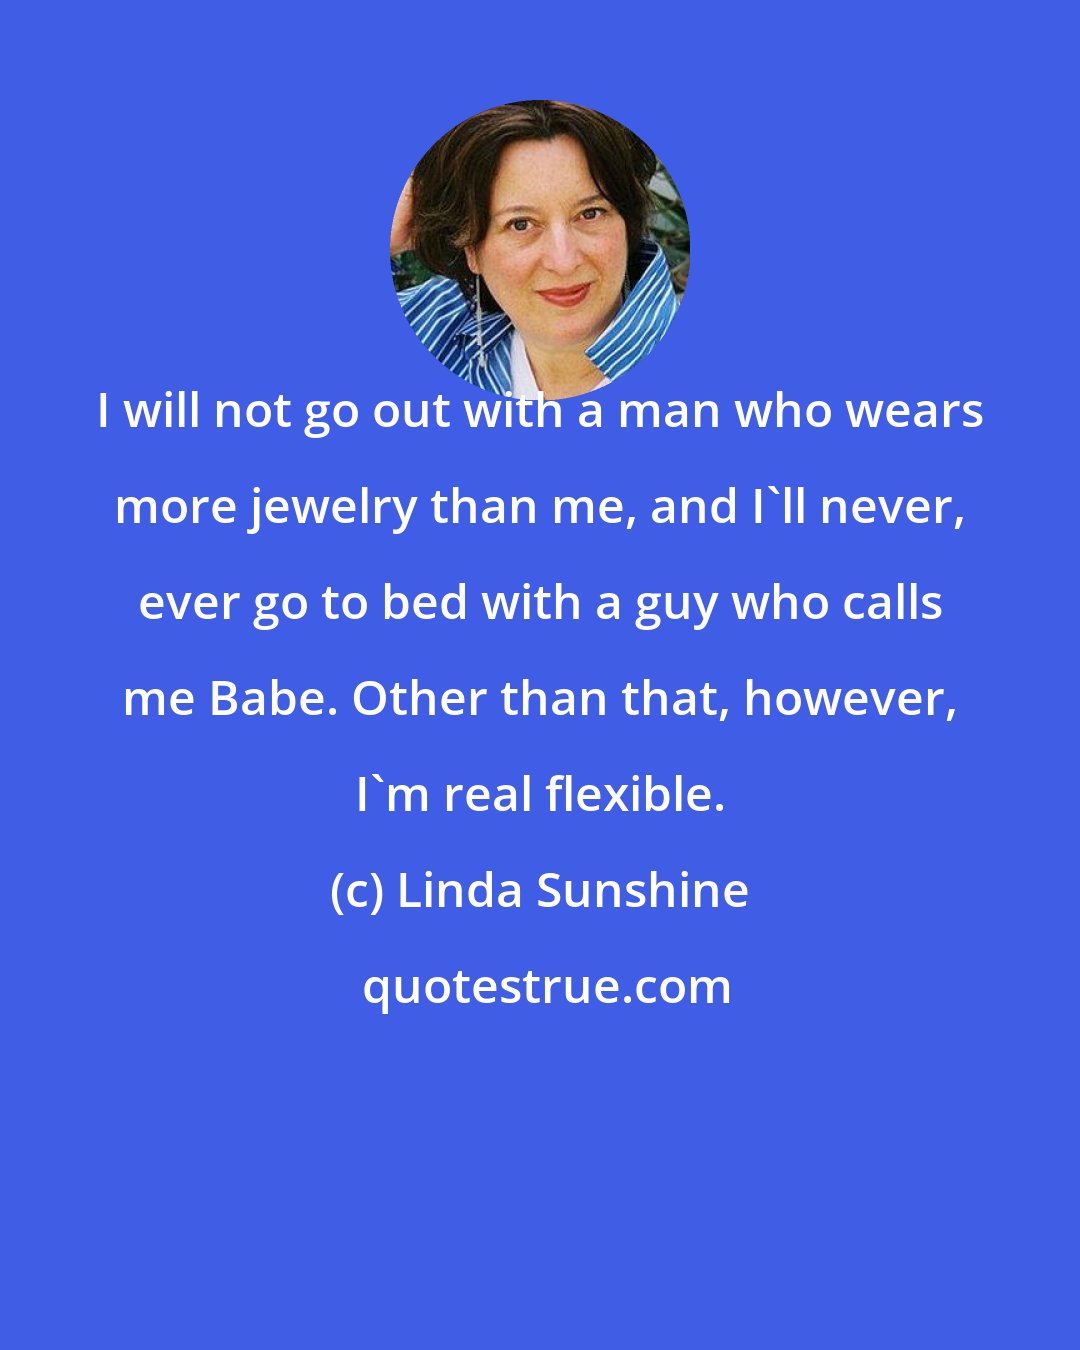 Linda Sunshine: I will not go out with a man who wears more jewelry than me, and I'll never, ever go to bed with a guy who calls me Babe. Other than that, however, I'm real flexible.